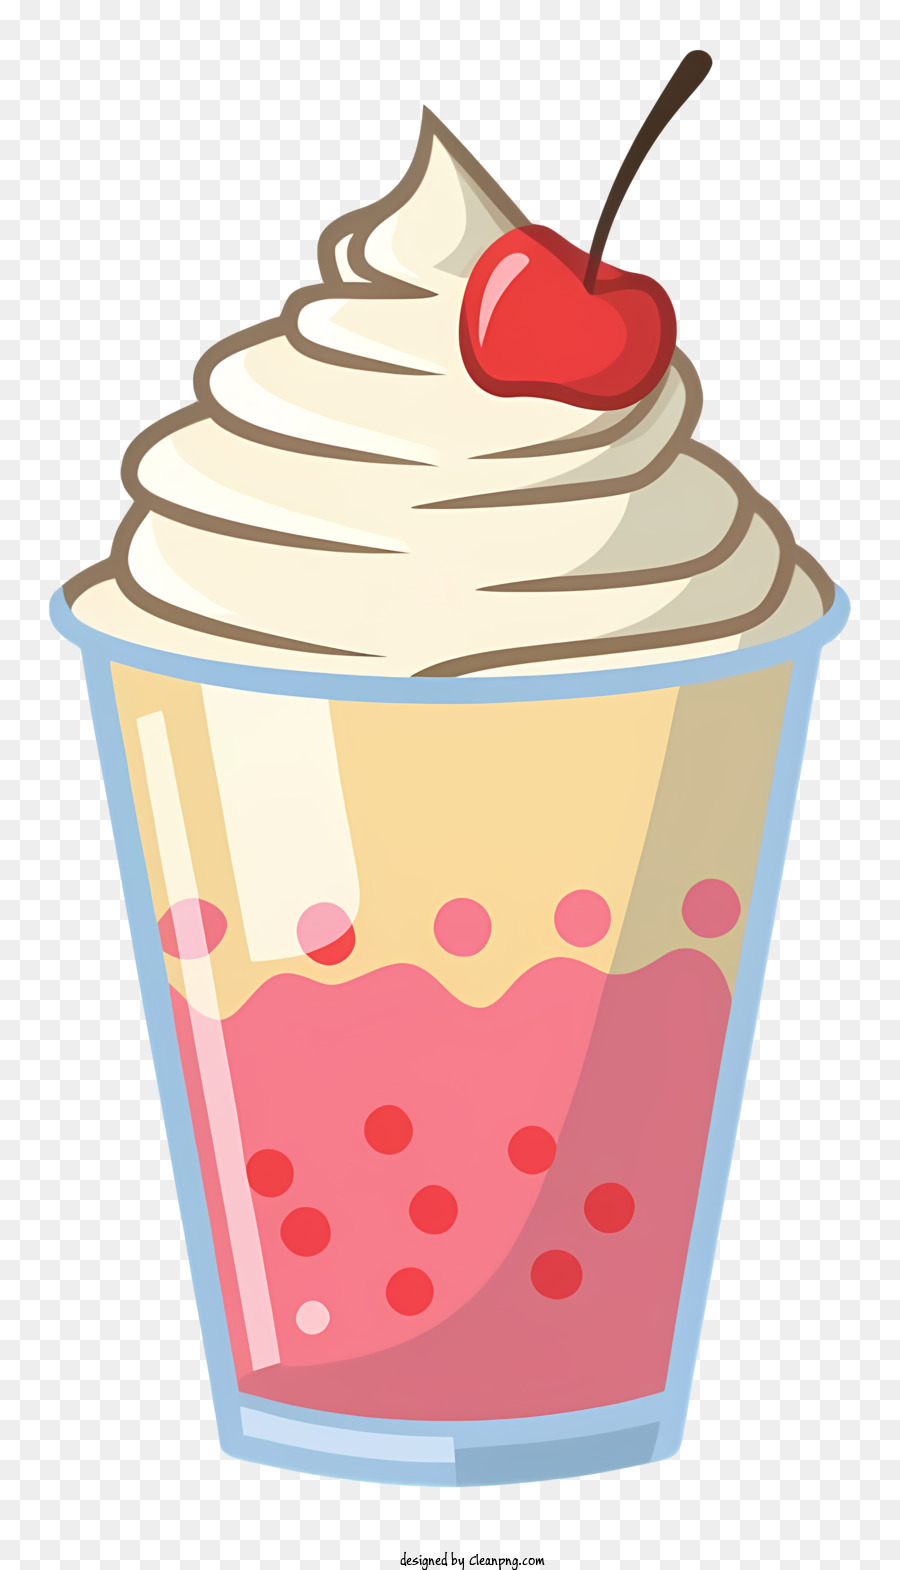 How To Draw A Cute Ice Cream Cup - YouTube